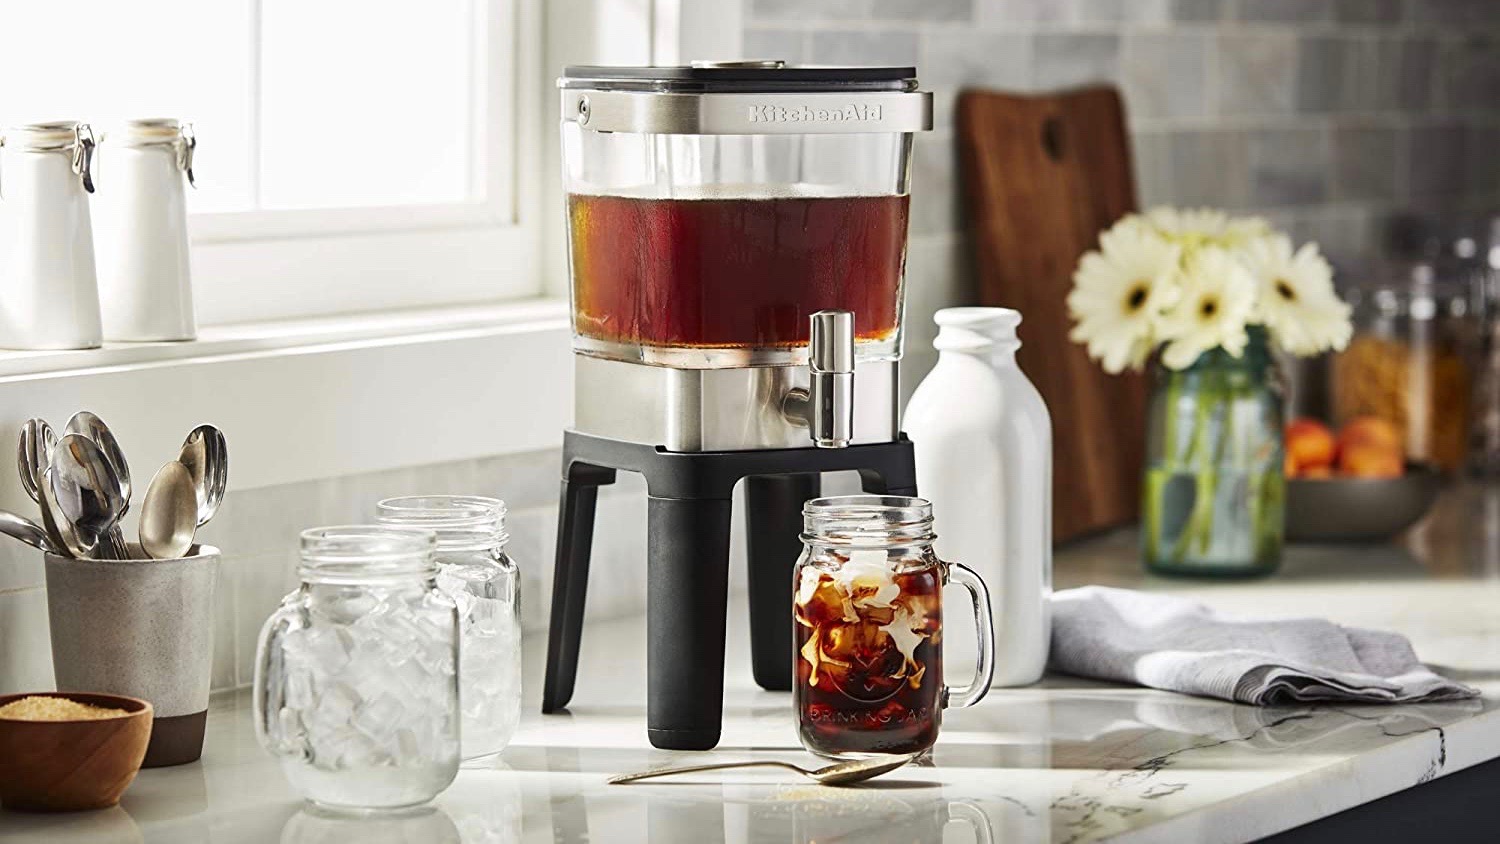 The Best Cold Brew Coffee Maker — Review After 11 Months of Daily Use, by  Thomas Smith